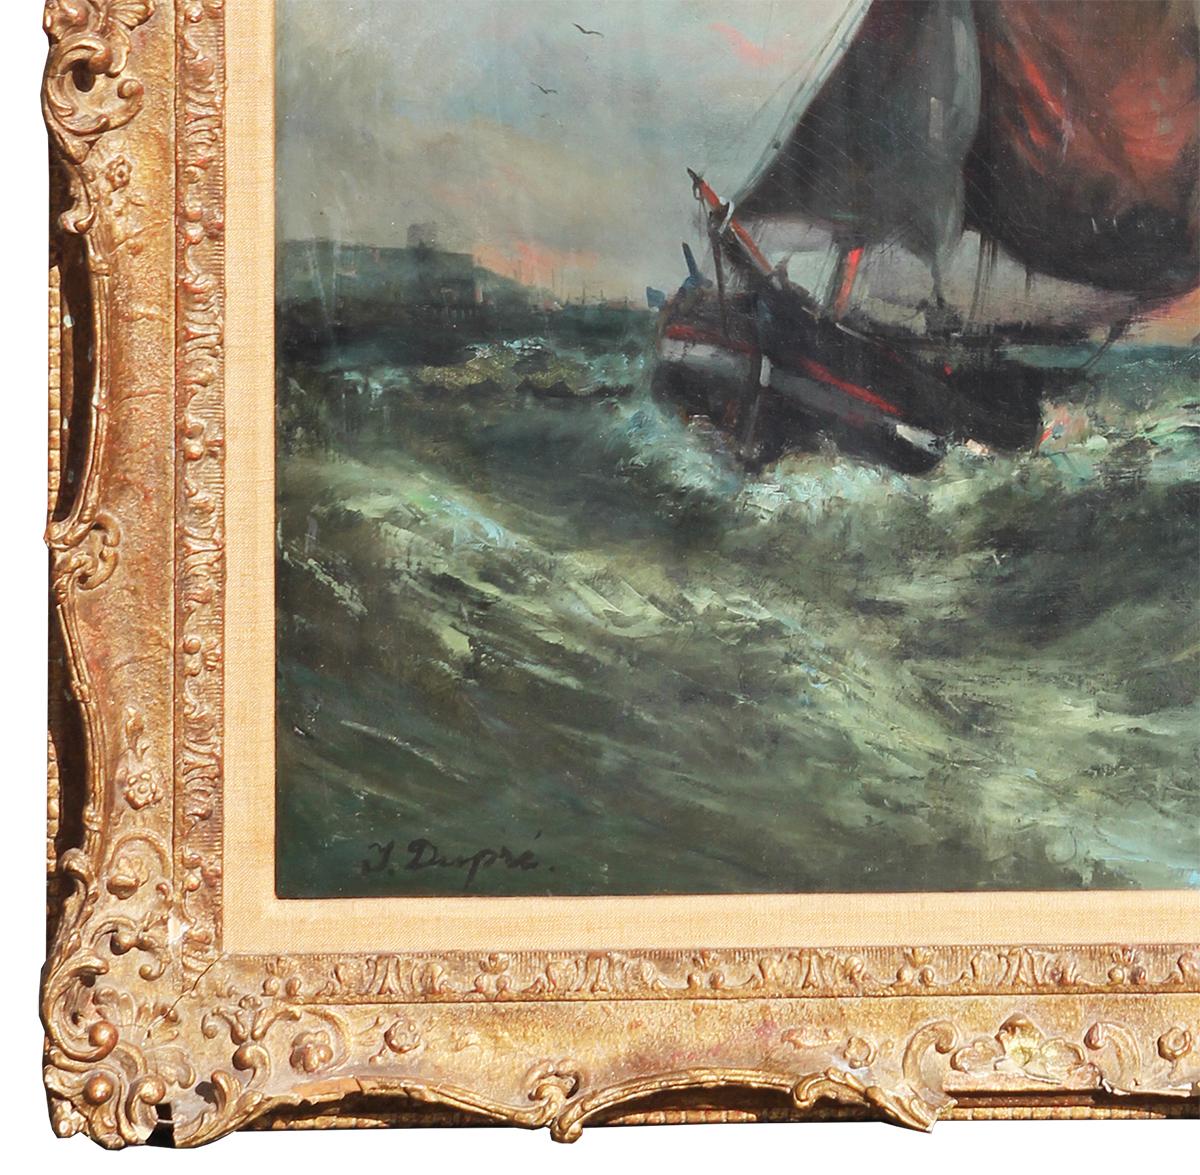 Blue toned impressionist sunset seascape depicting a boat in a wavy sea. Signed by artist in bottom left. Framed in a carved vintage frame. 

Dimensions Without Frame: H 10 in. x W 12.88 in.

Artist Biography: Jules Dupré was a French painter best